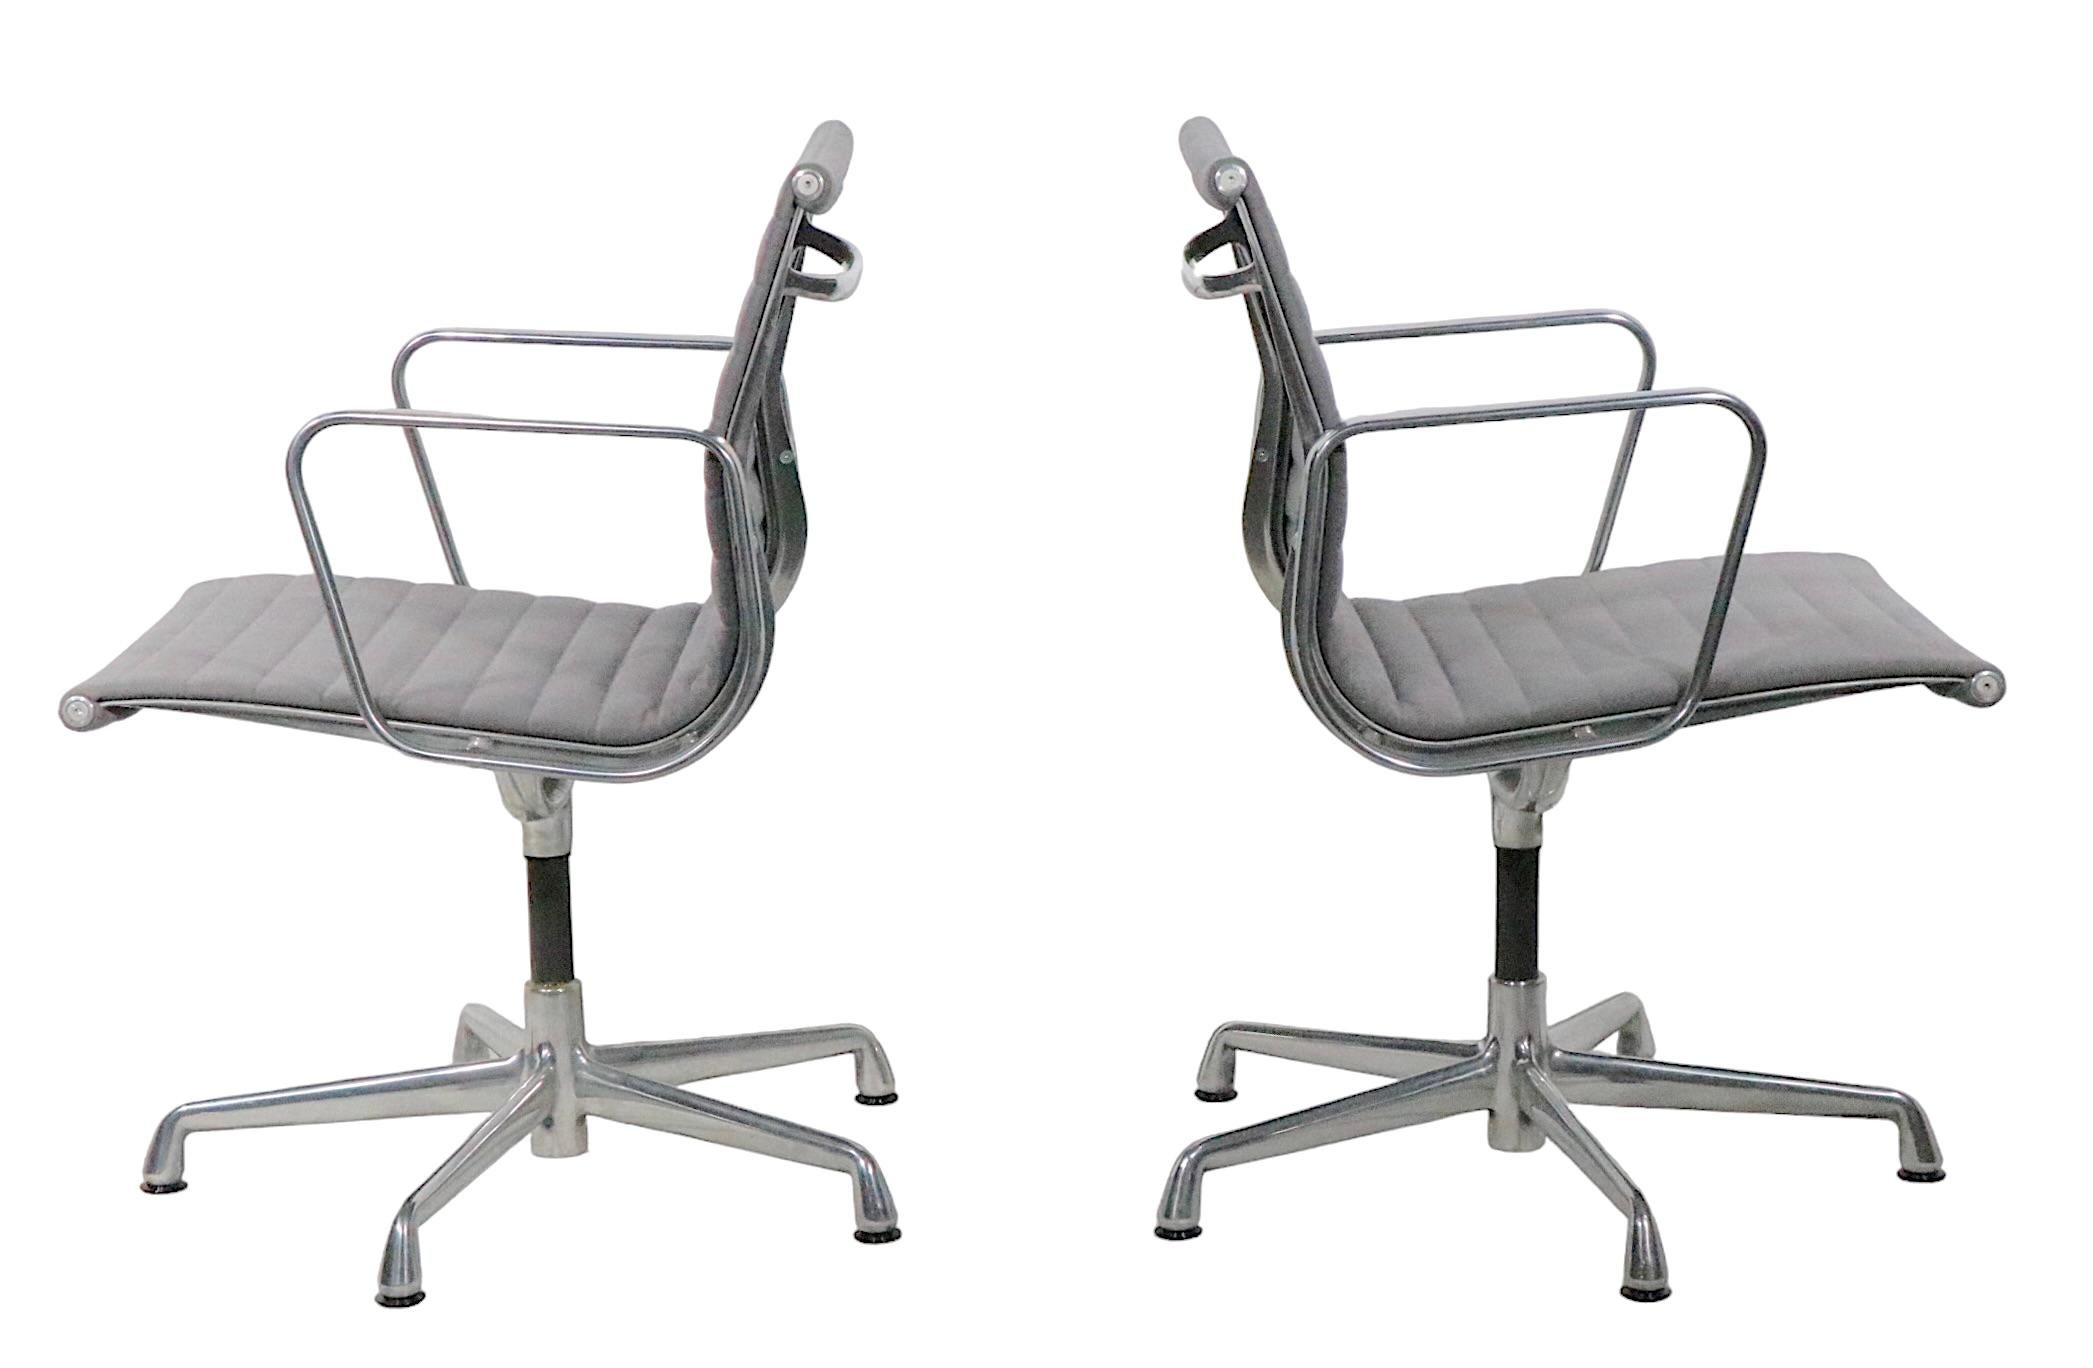 Aluminum Eames Management Chairs in Grey Fabric Upholstery c. 1980 - 1990s 4 Available  For Sale